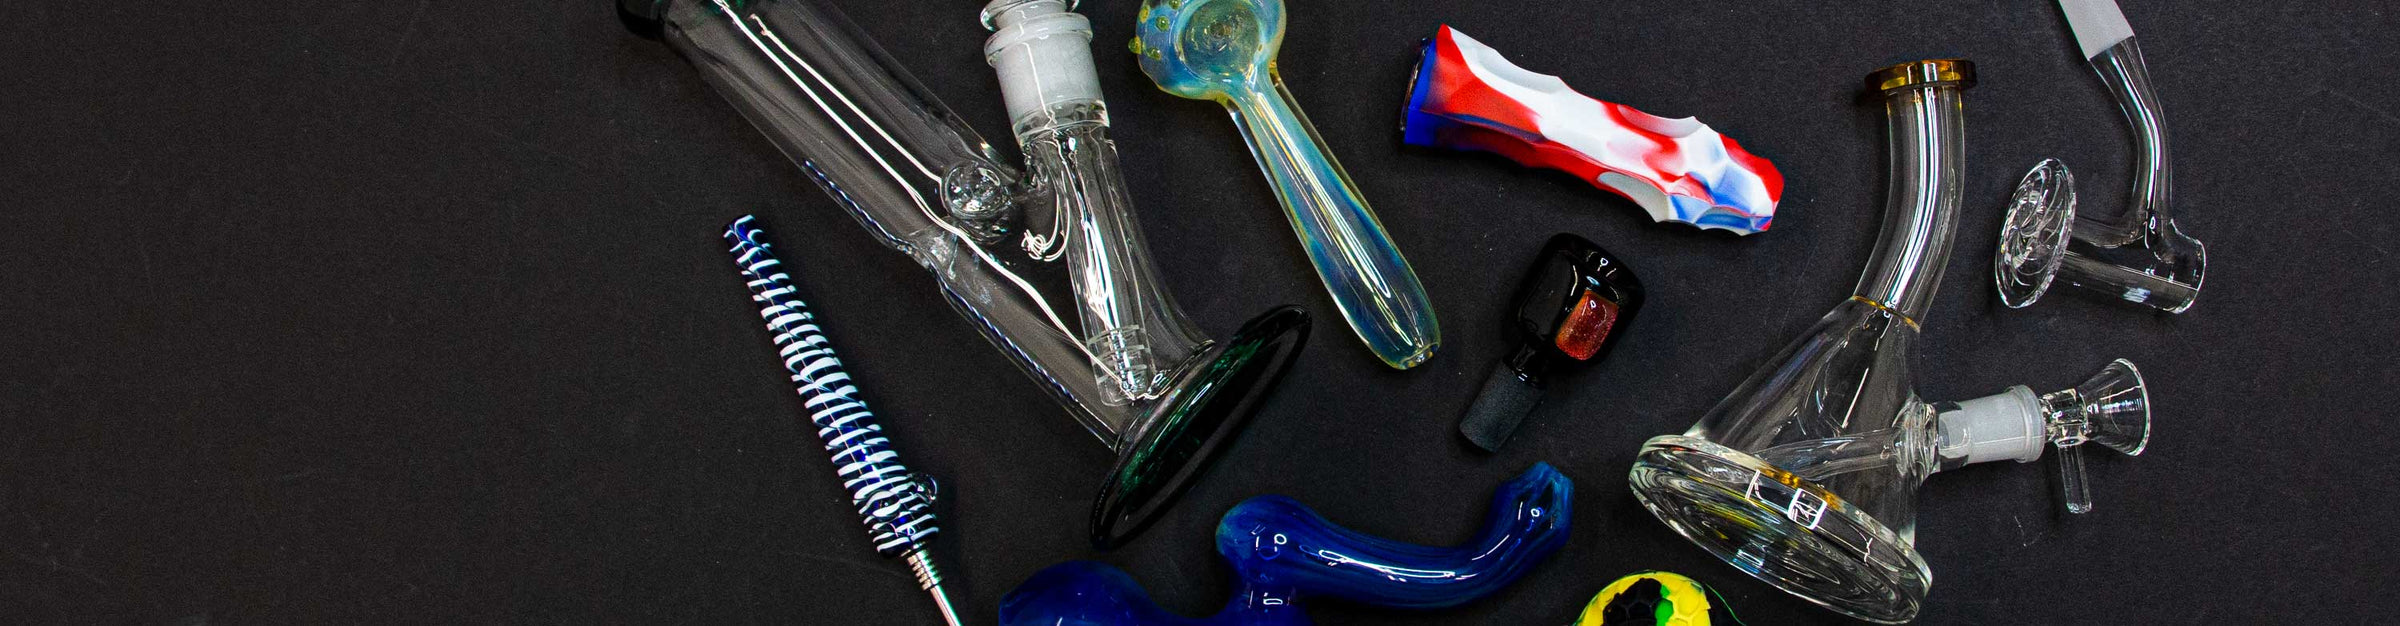 Got Vape Glass Distro various glass products laying down on black background